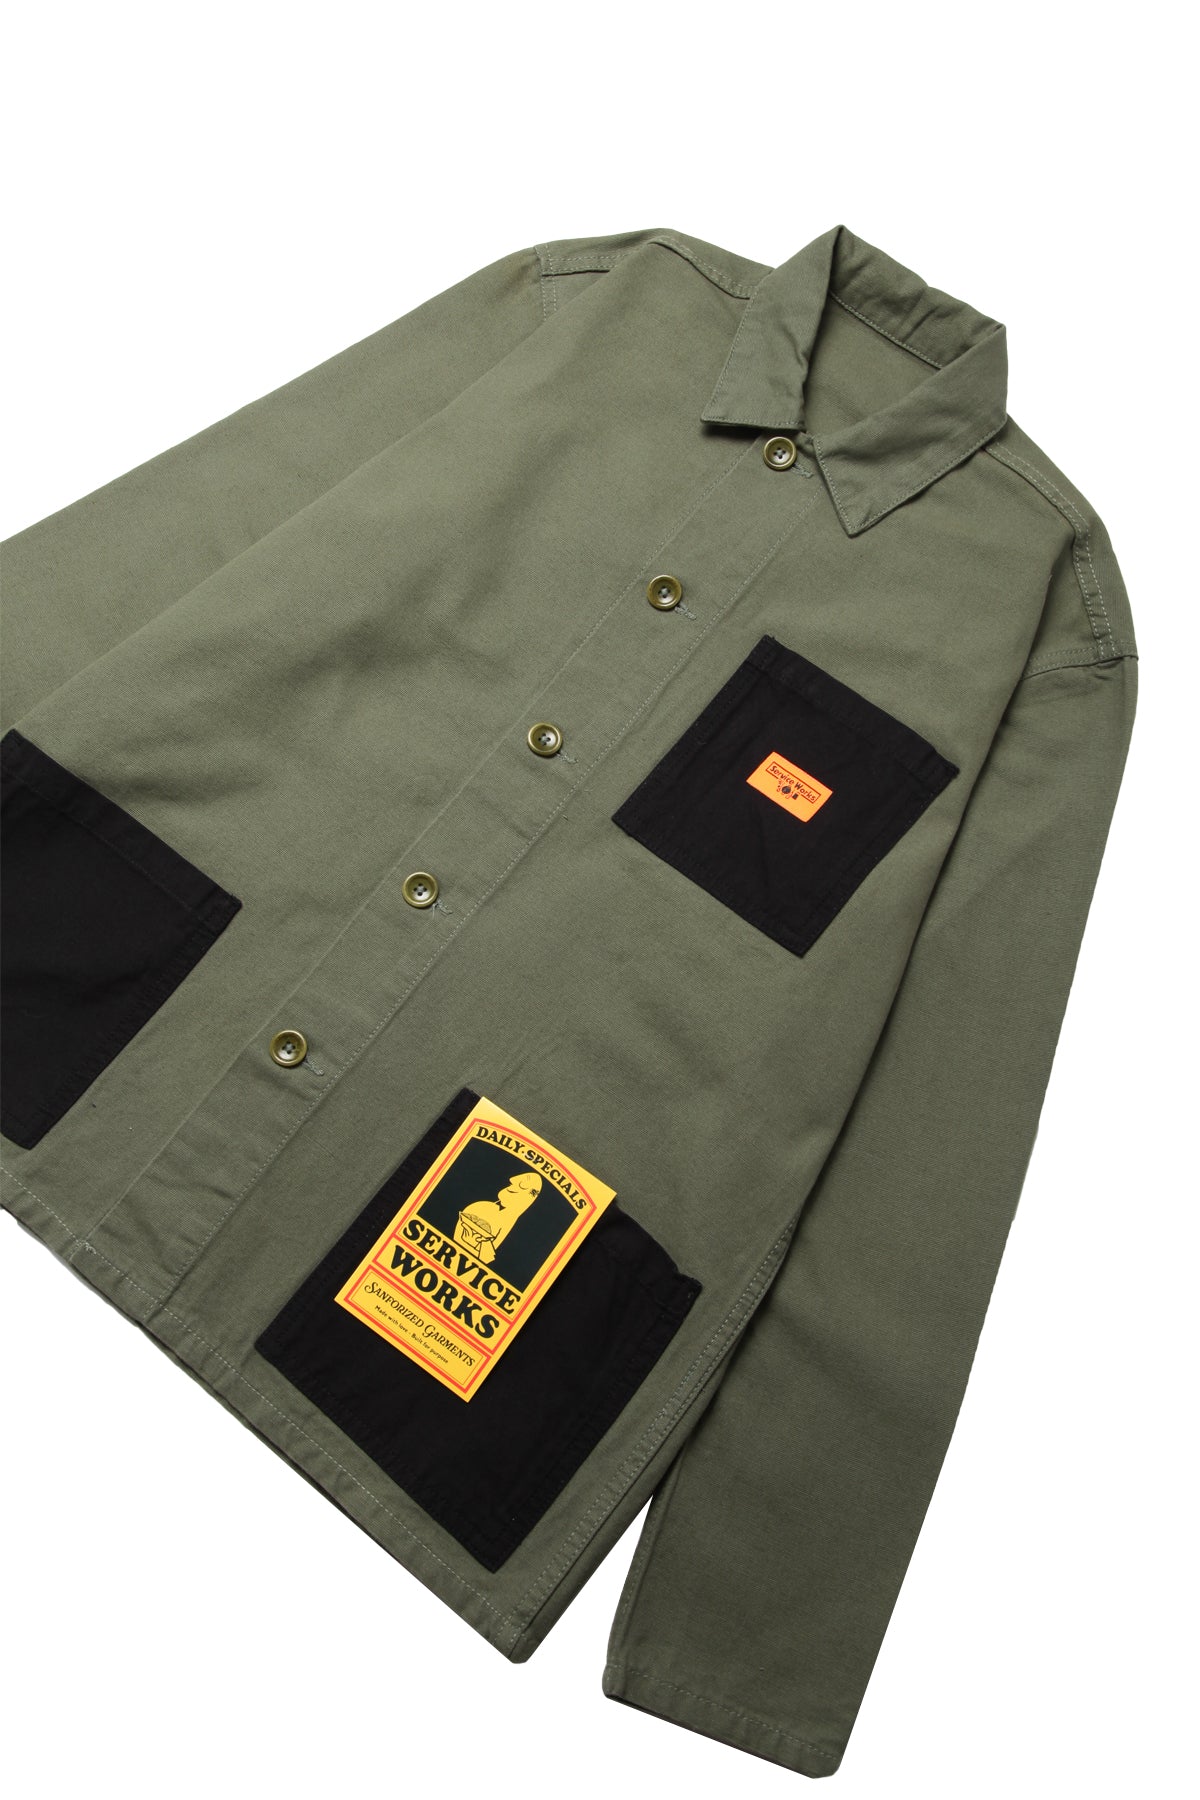 Service Works - Coverall Jacket - Woodland